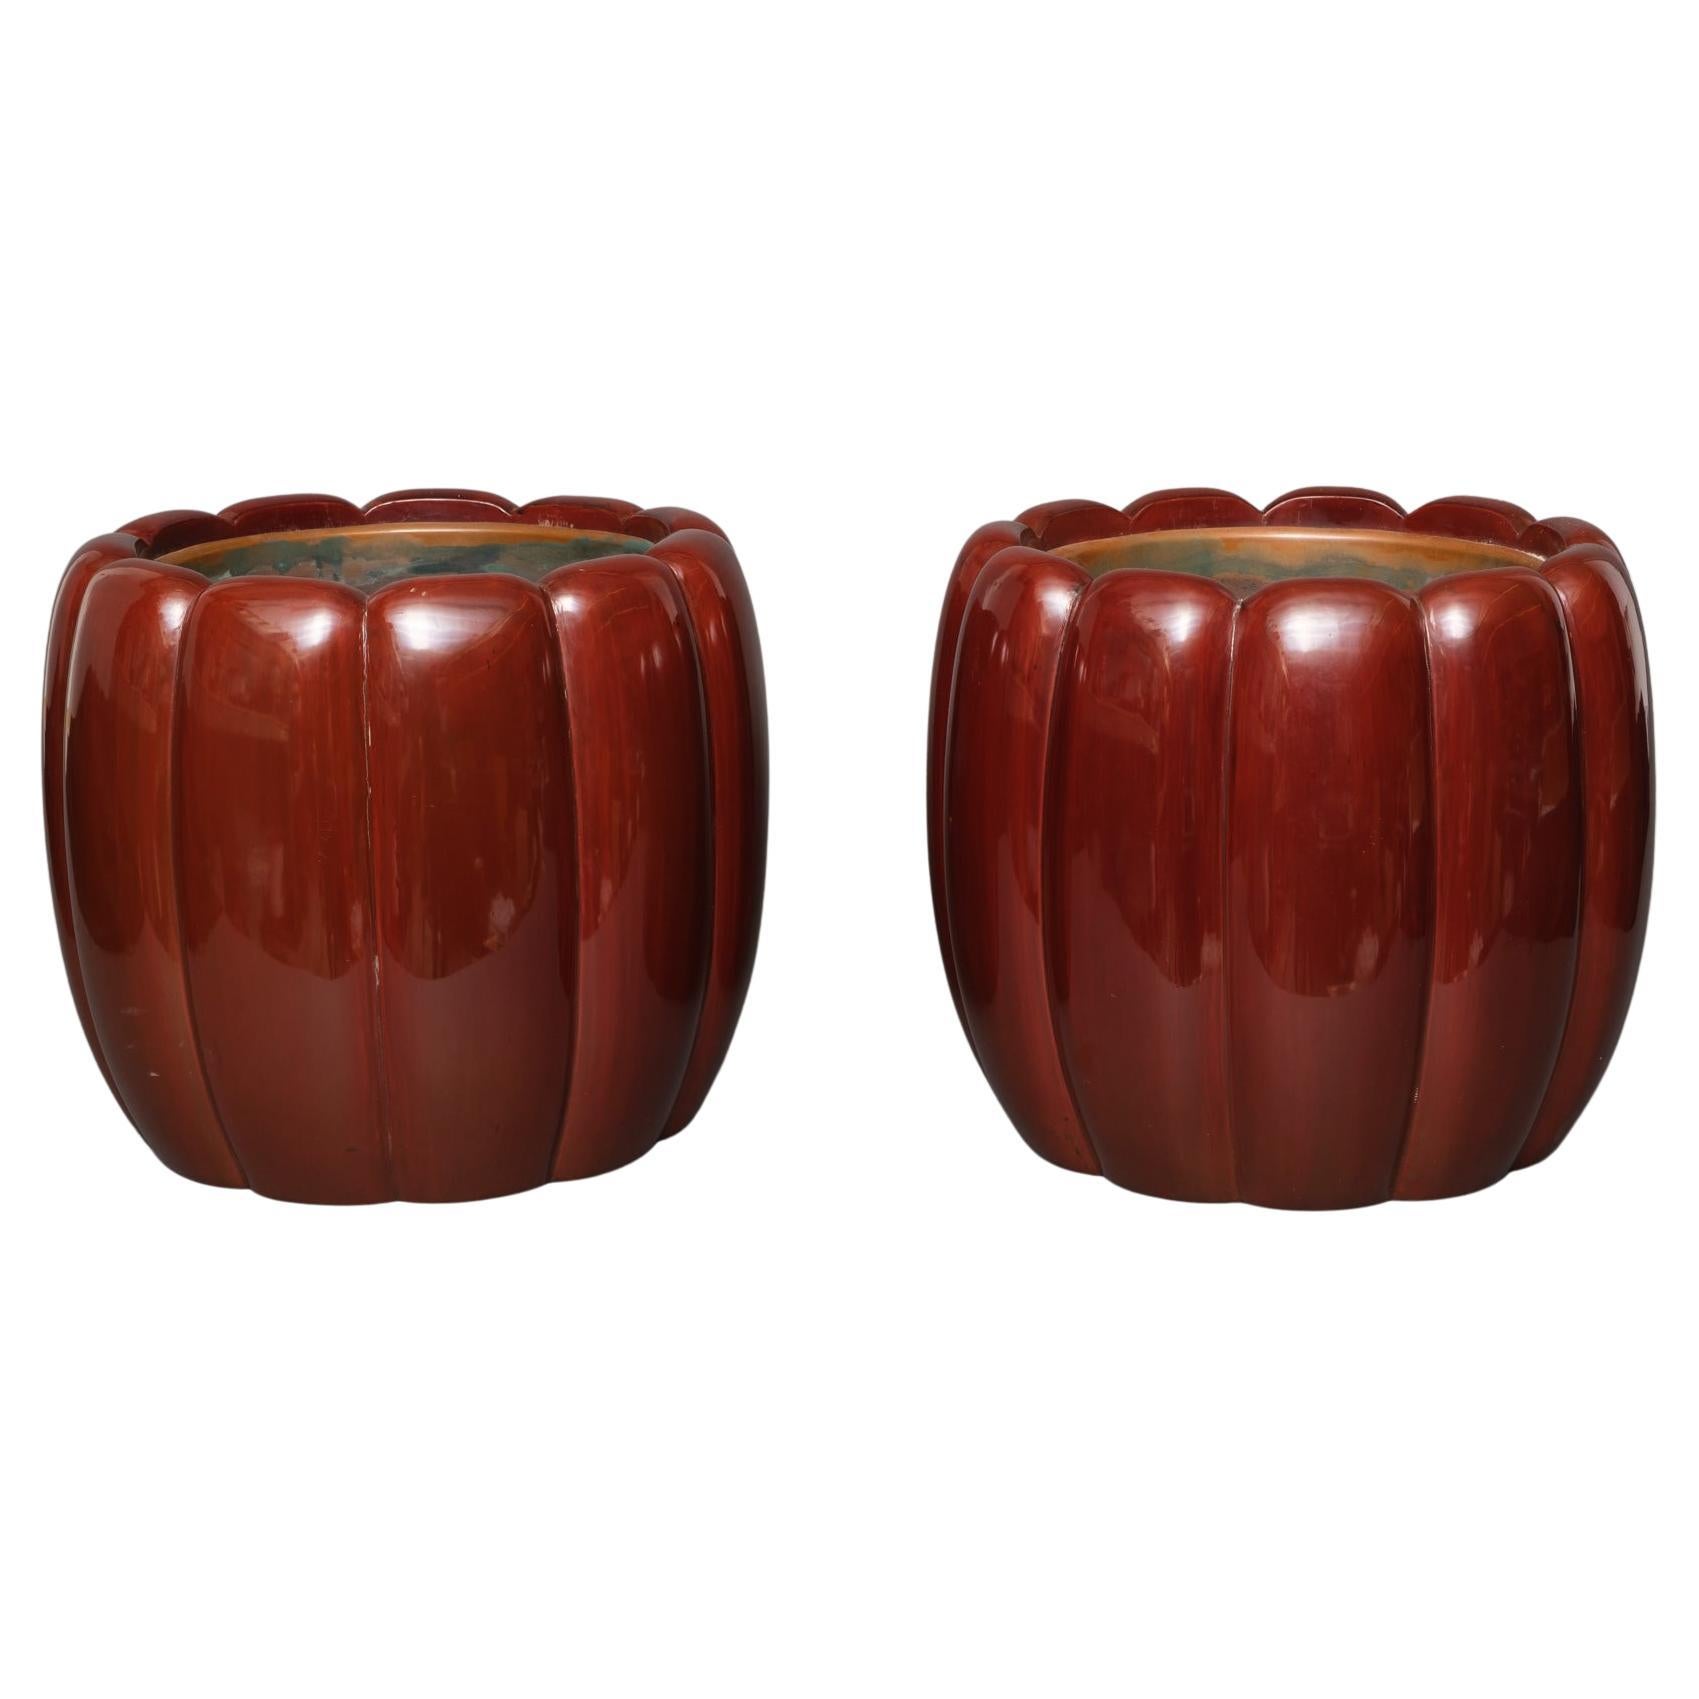 Pair of Japanese Red Lacquered Hibachi 火鉢 'Fire Bowls' Shaped like Flowers For Sale